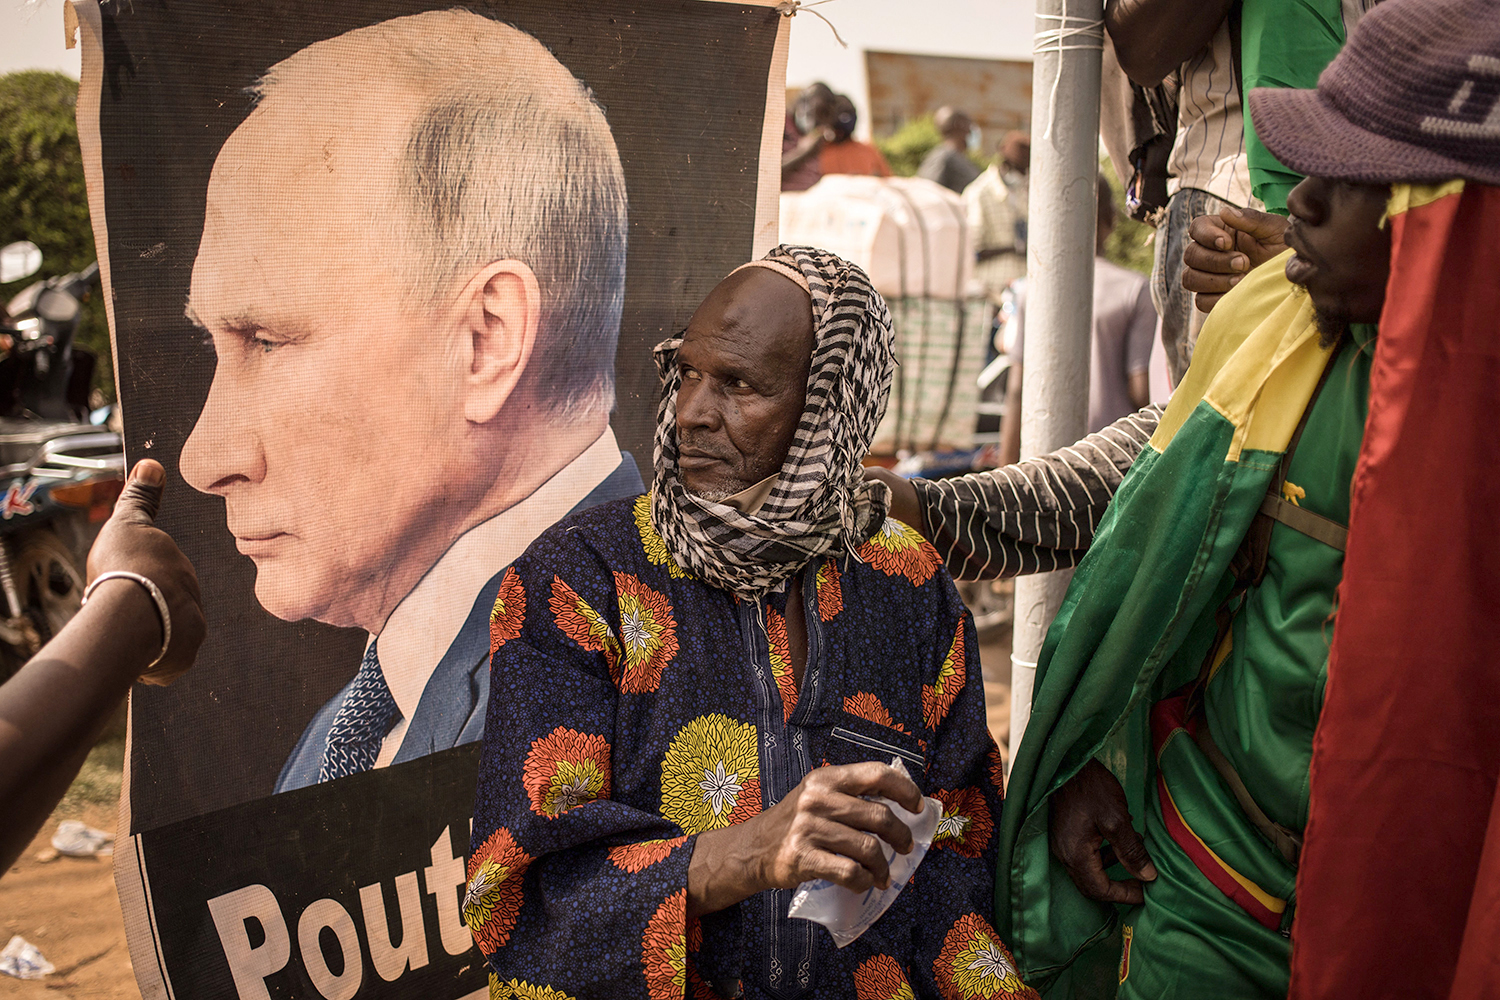 A man sits near a portrait of Russian President Vladimir Putin during a demonstration in Bamako, Mali, on Feb. 19 celebrating France’s announcement that it will withdraw its troops from the country.